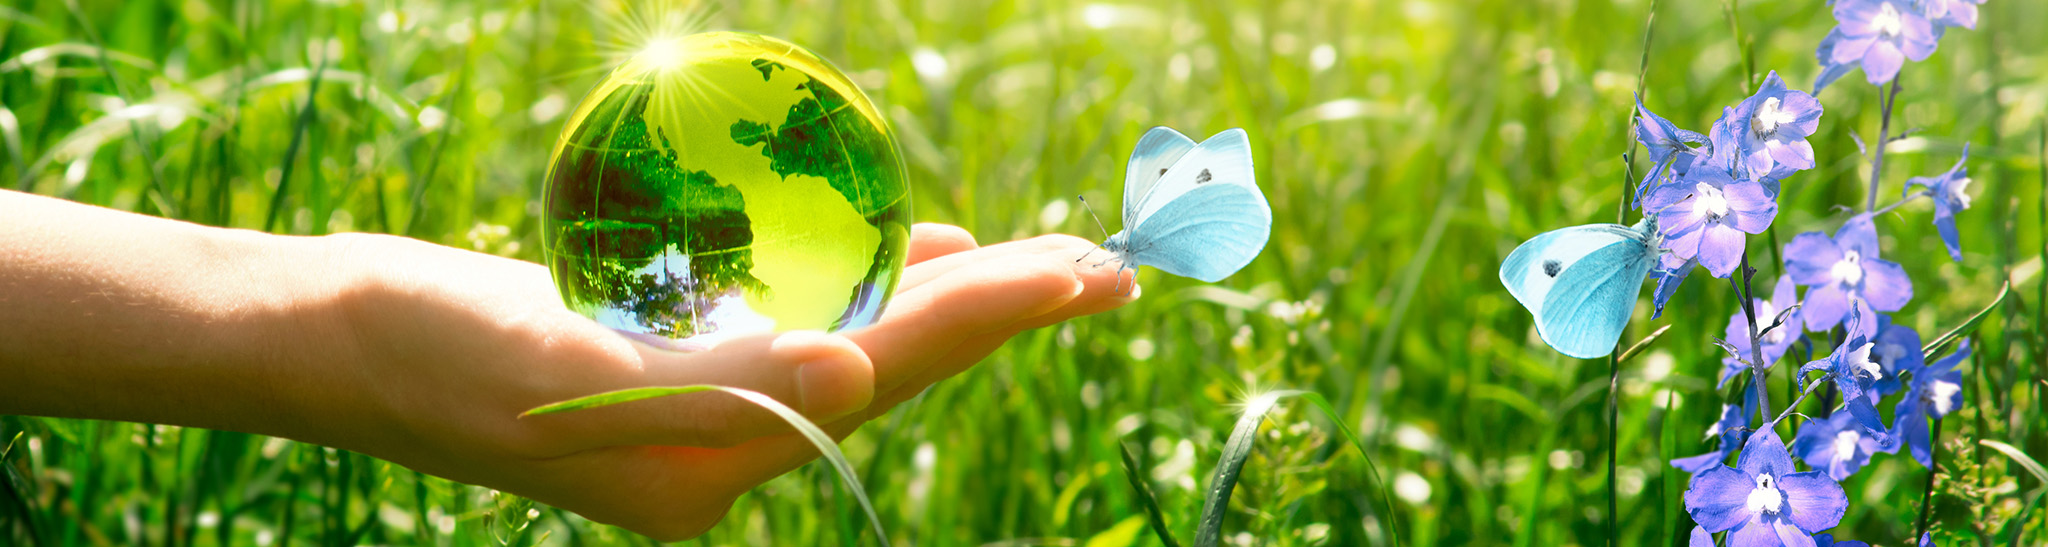 Earth crystal glass globe and butterfly with blue wings in human hand on grass and bluebell flowers background. Saving environment and clean green planet concept. Card for World Earth Day concept.